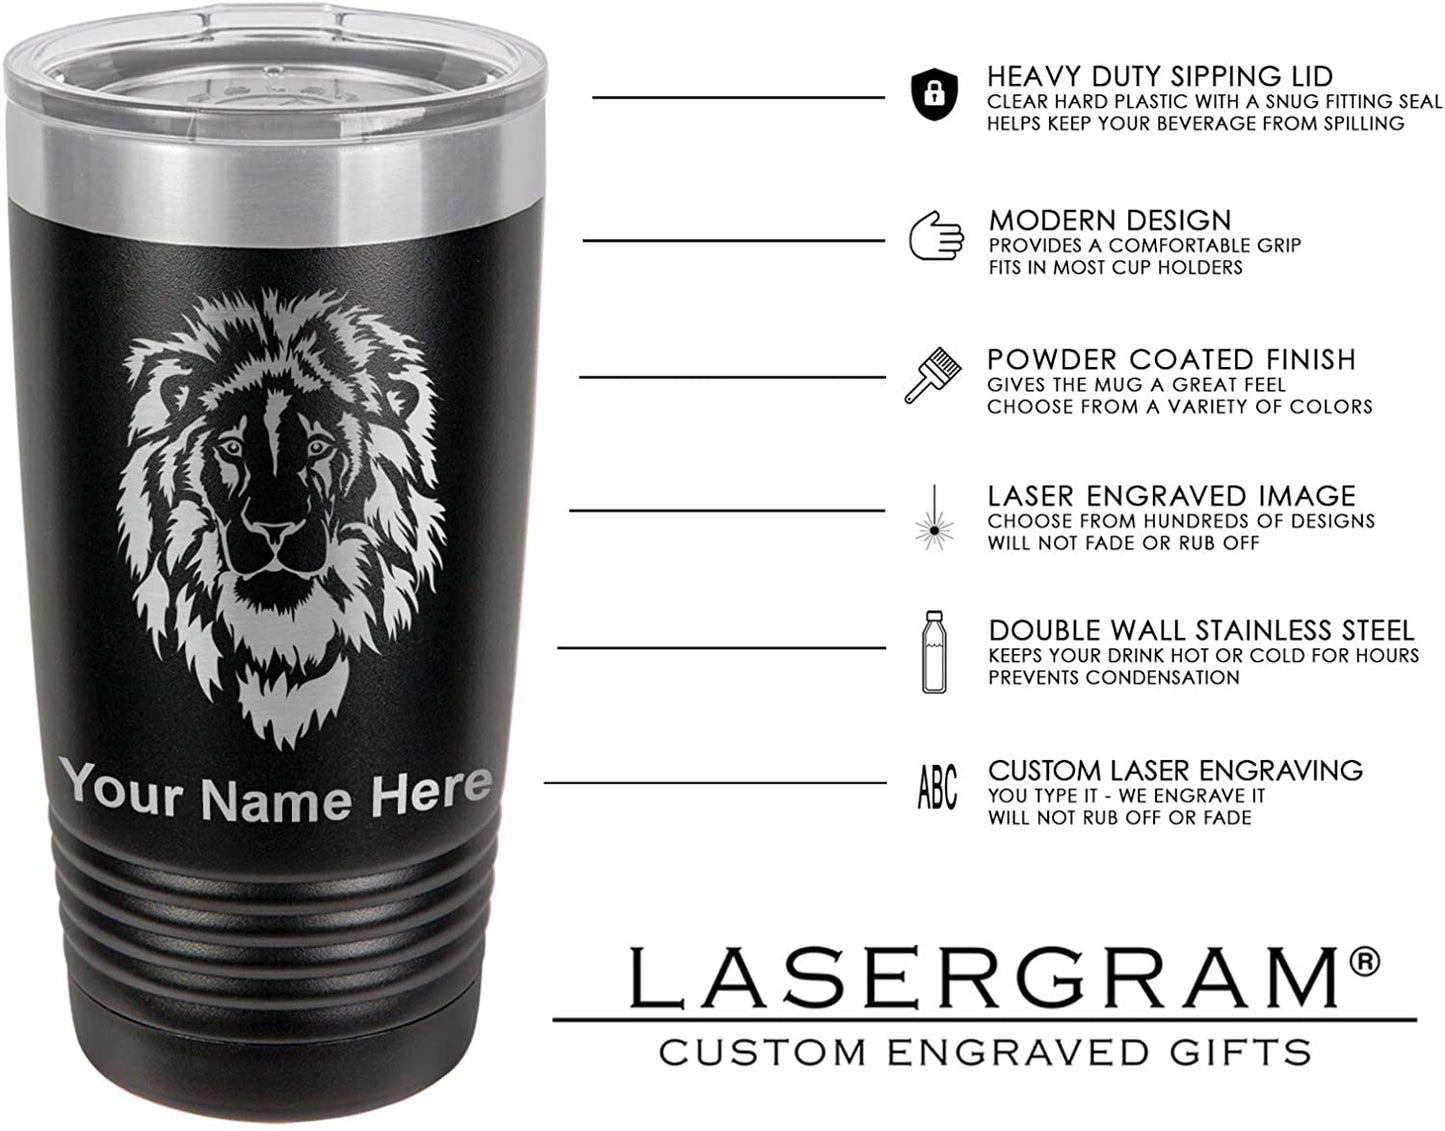 20oz Vacuum Insulated Tumbler Mug, Snowmobile, Personalized Engraving Included